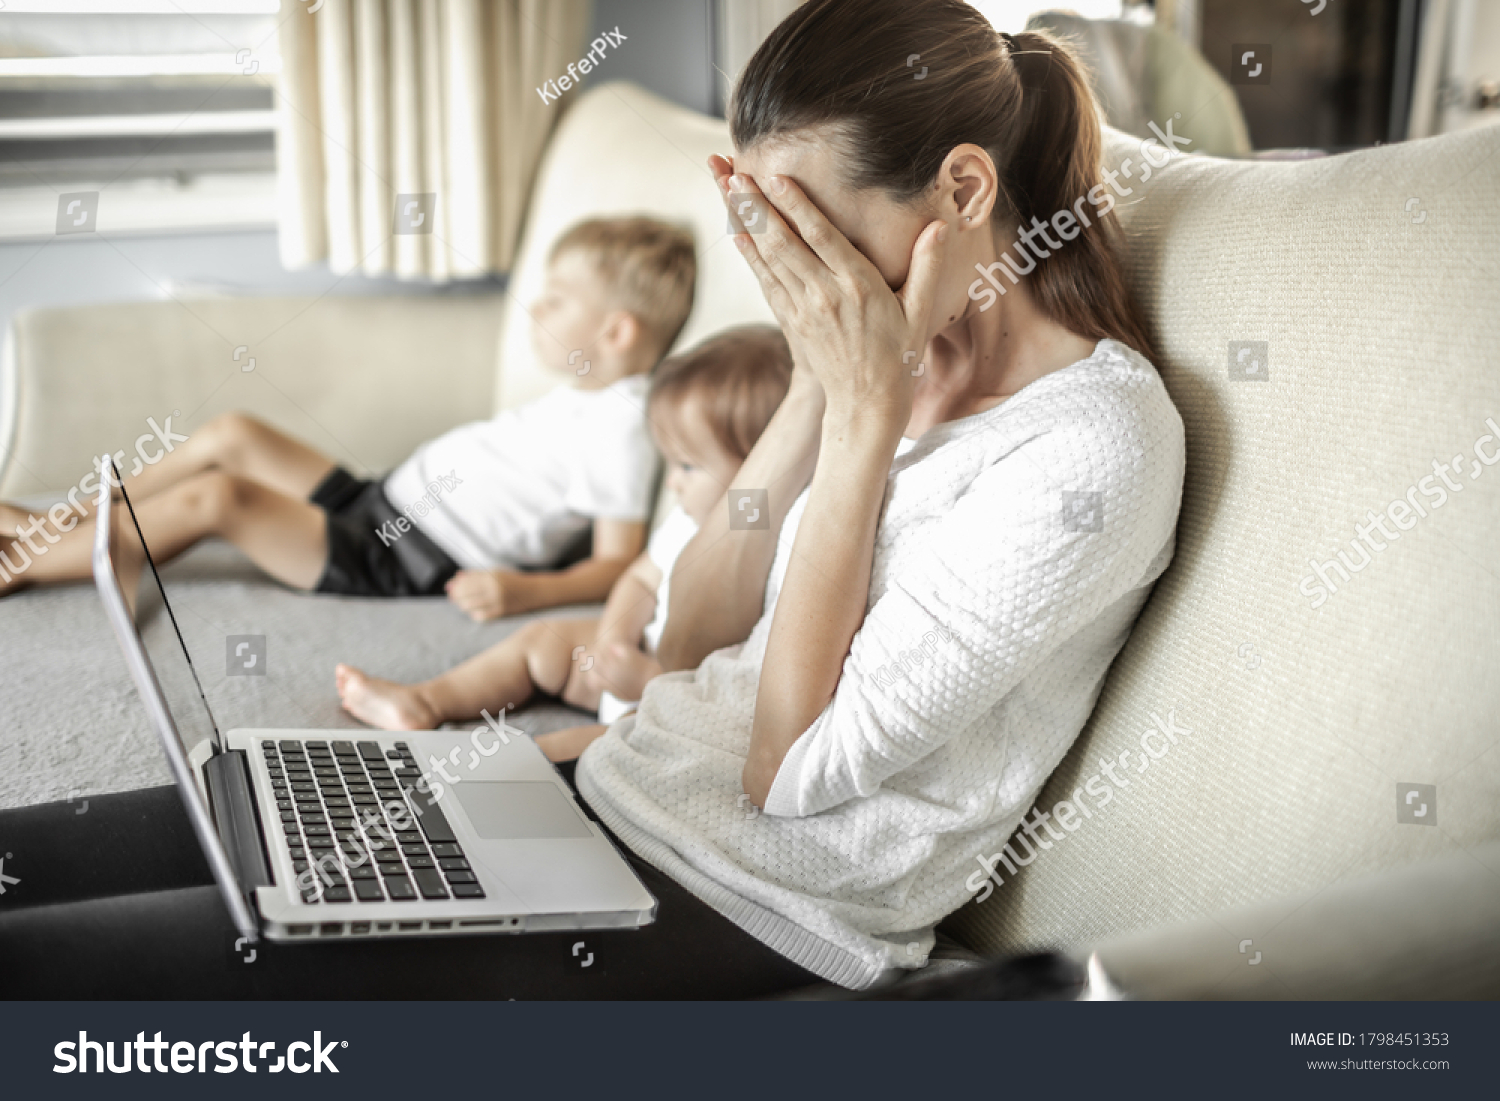 Stressed frustrated mother at home with children working on computer.  #1798451353